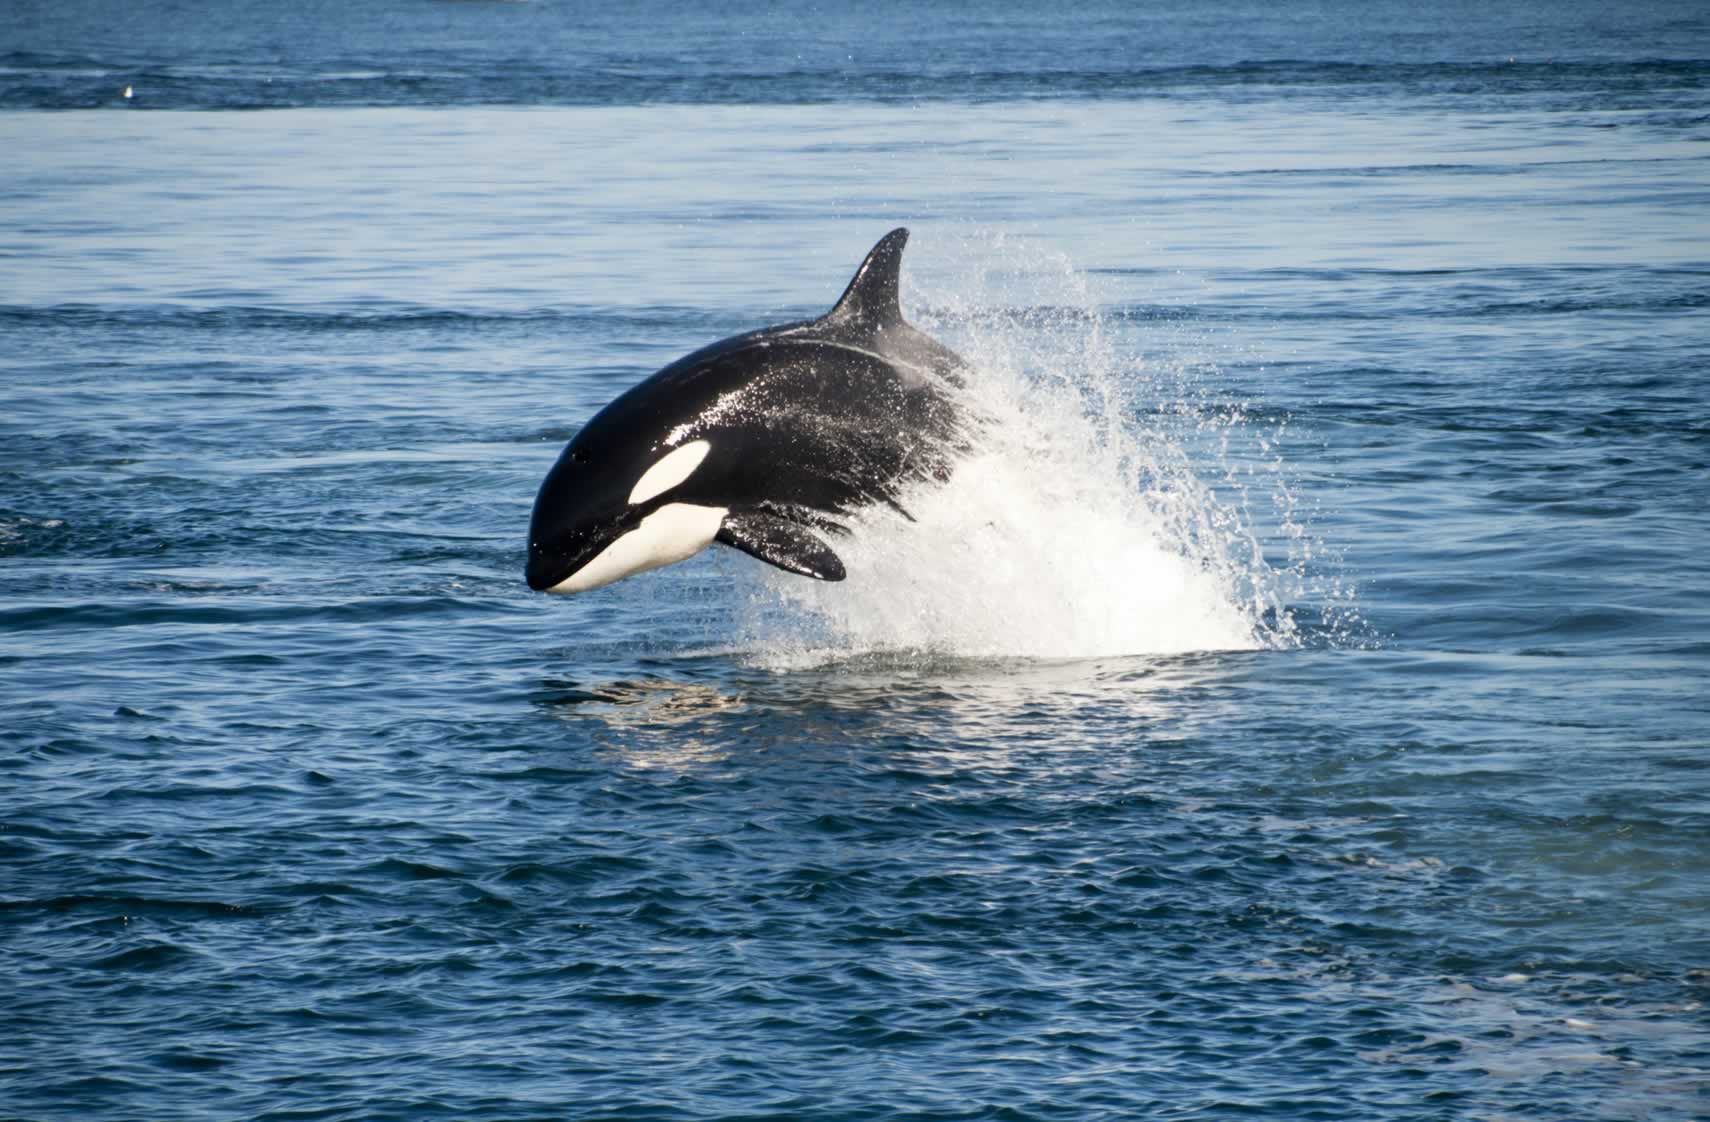 Corky, an orca skilled in acrobatics, gracefully jumps out of the water.